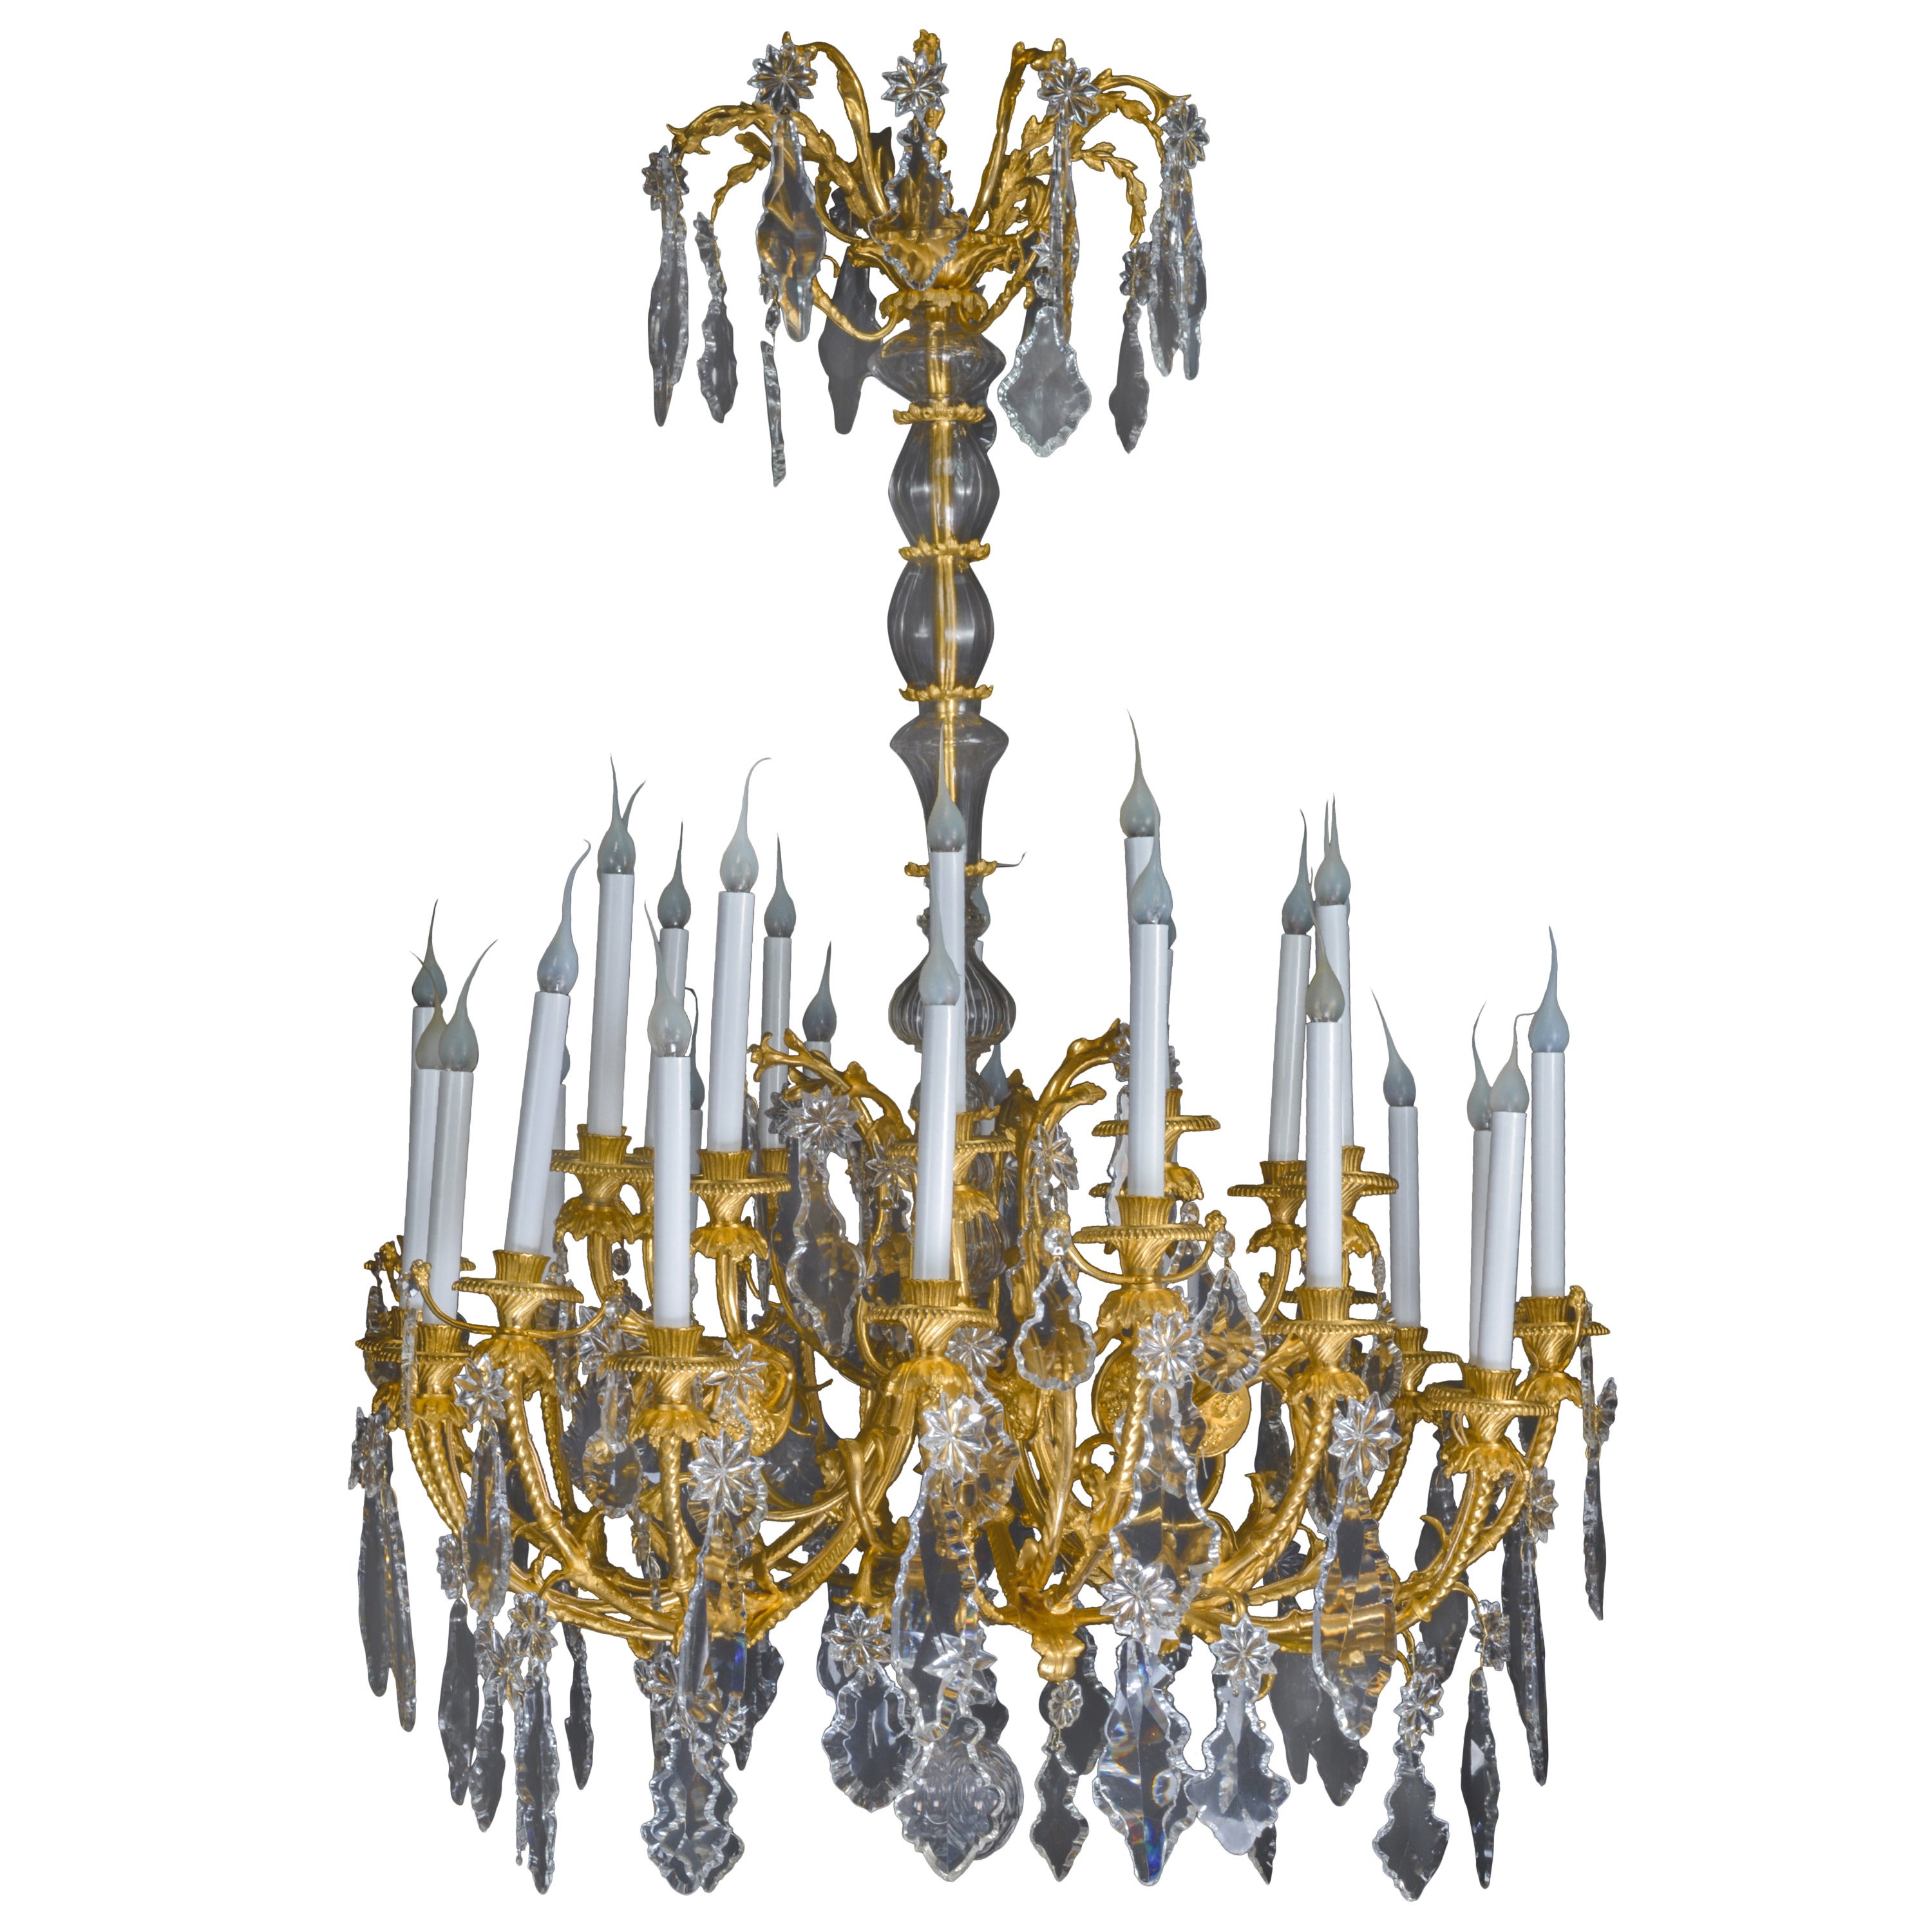 Spectacular Antique French Louis XVI Style Baccarat Bronze & Crystal Chandelier